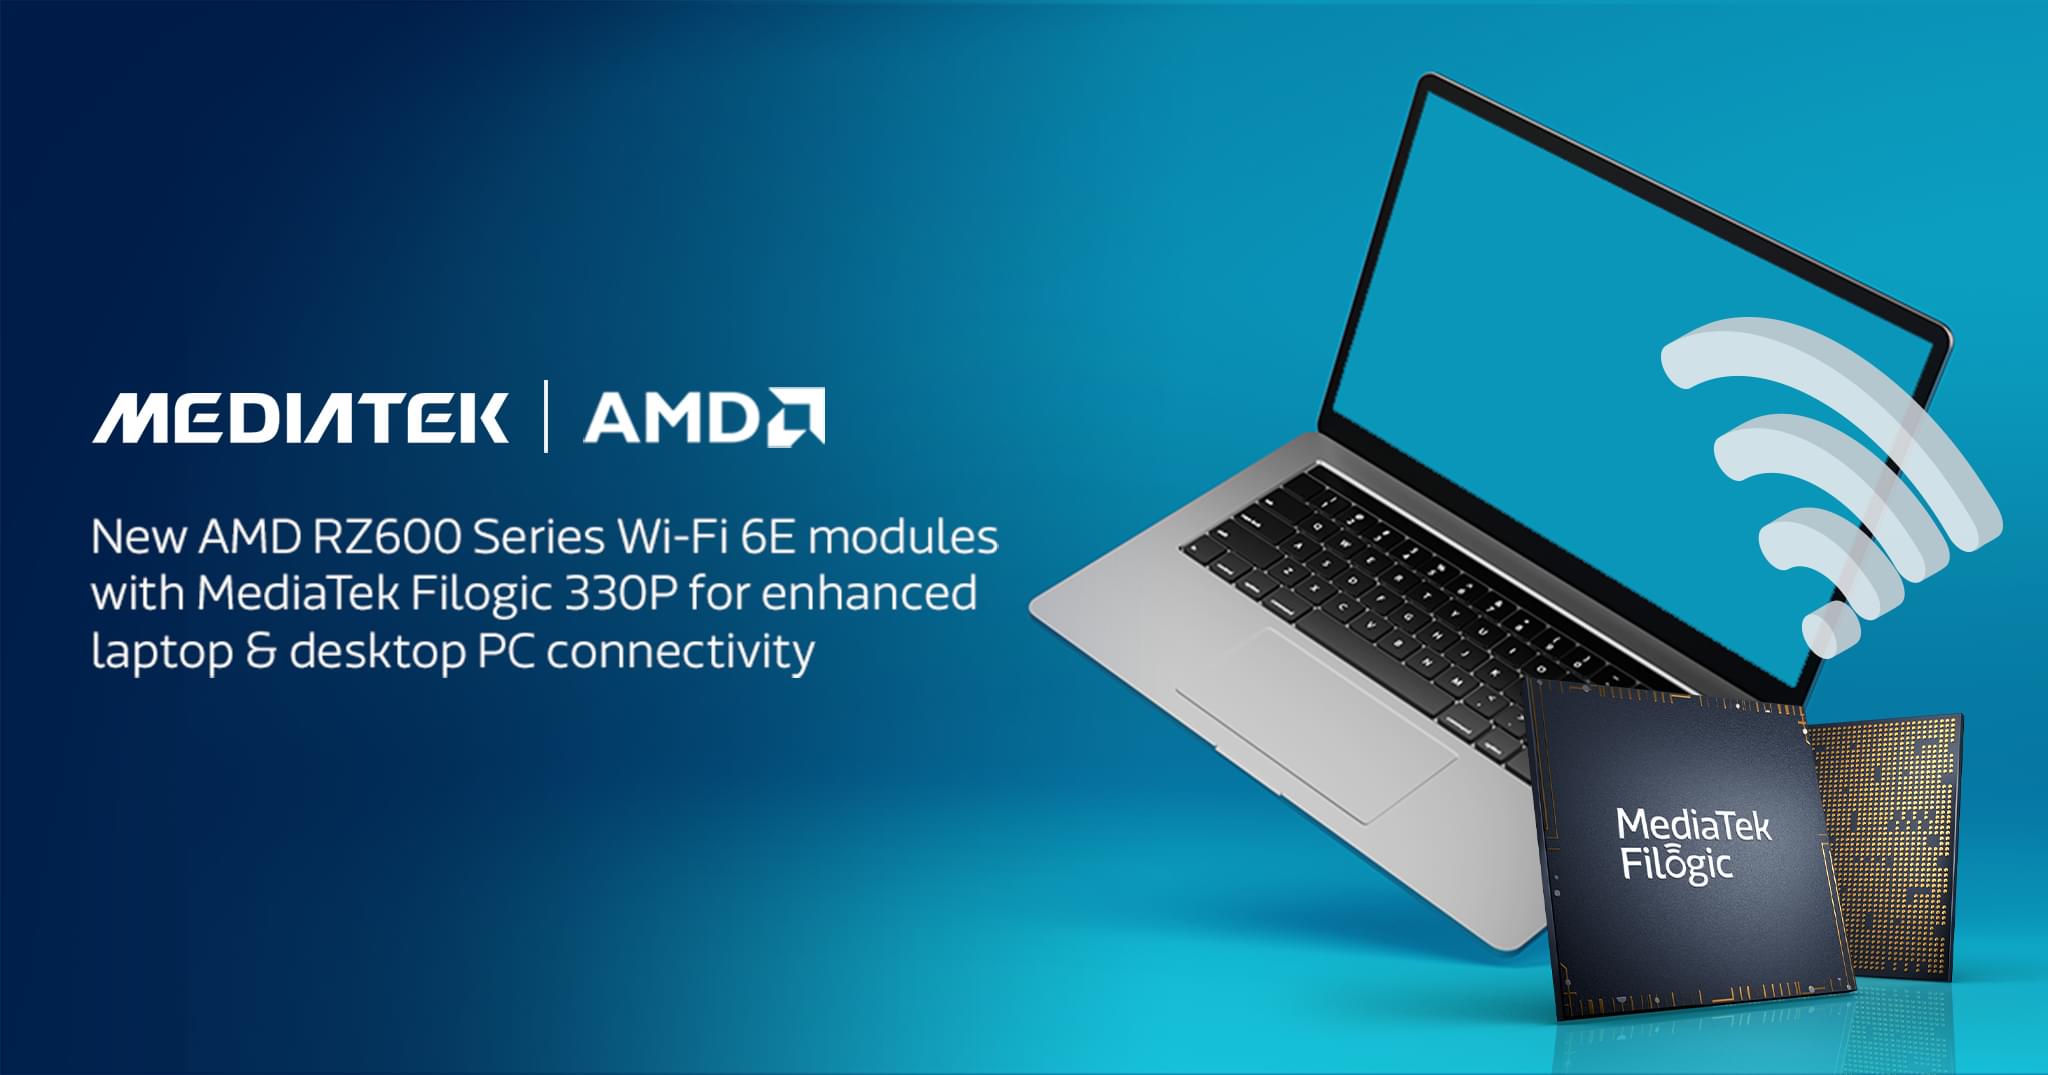 MediaTek and AMD announce co-engineered Wi-Fi 6E solutions